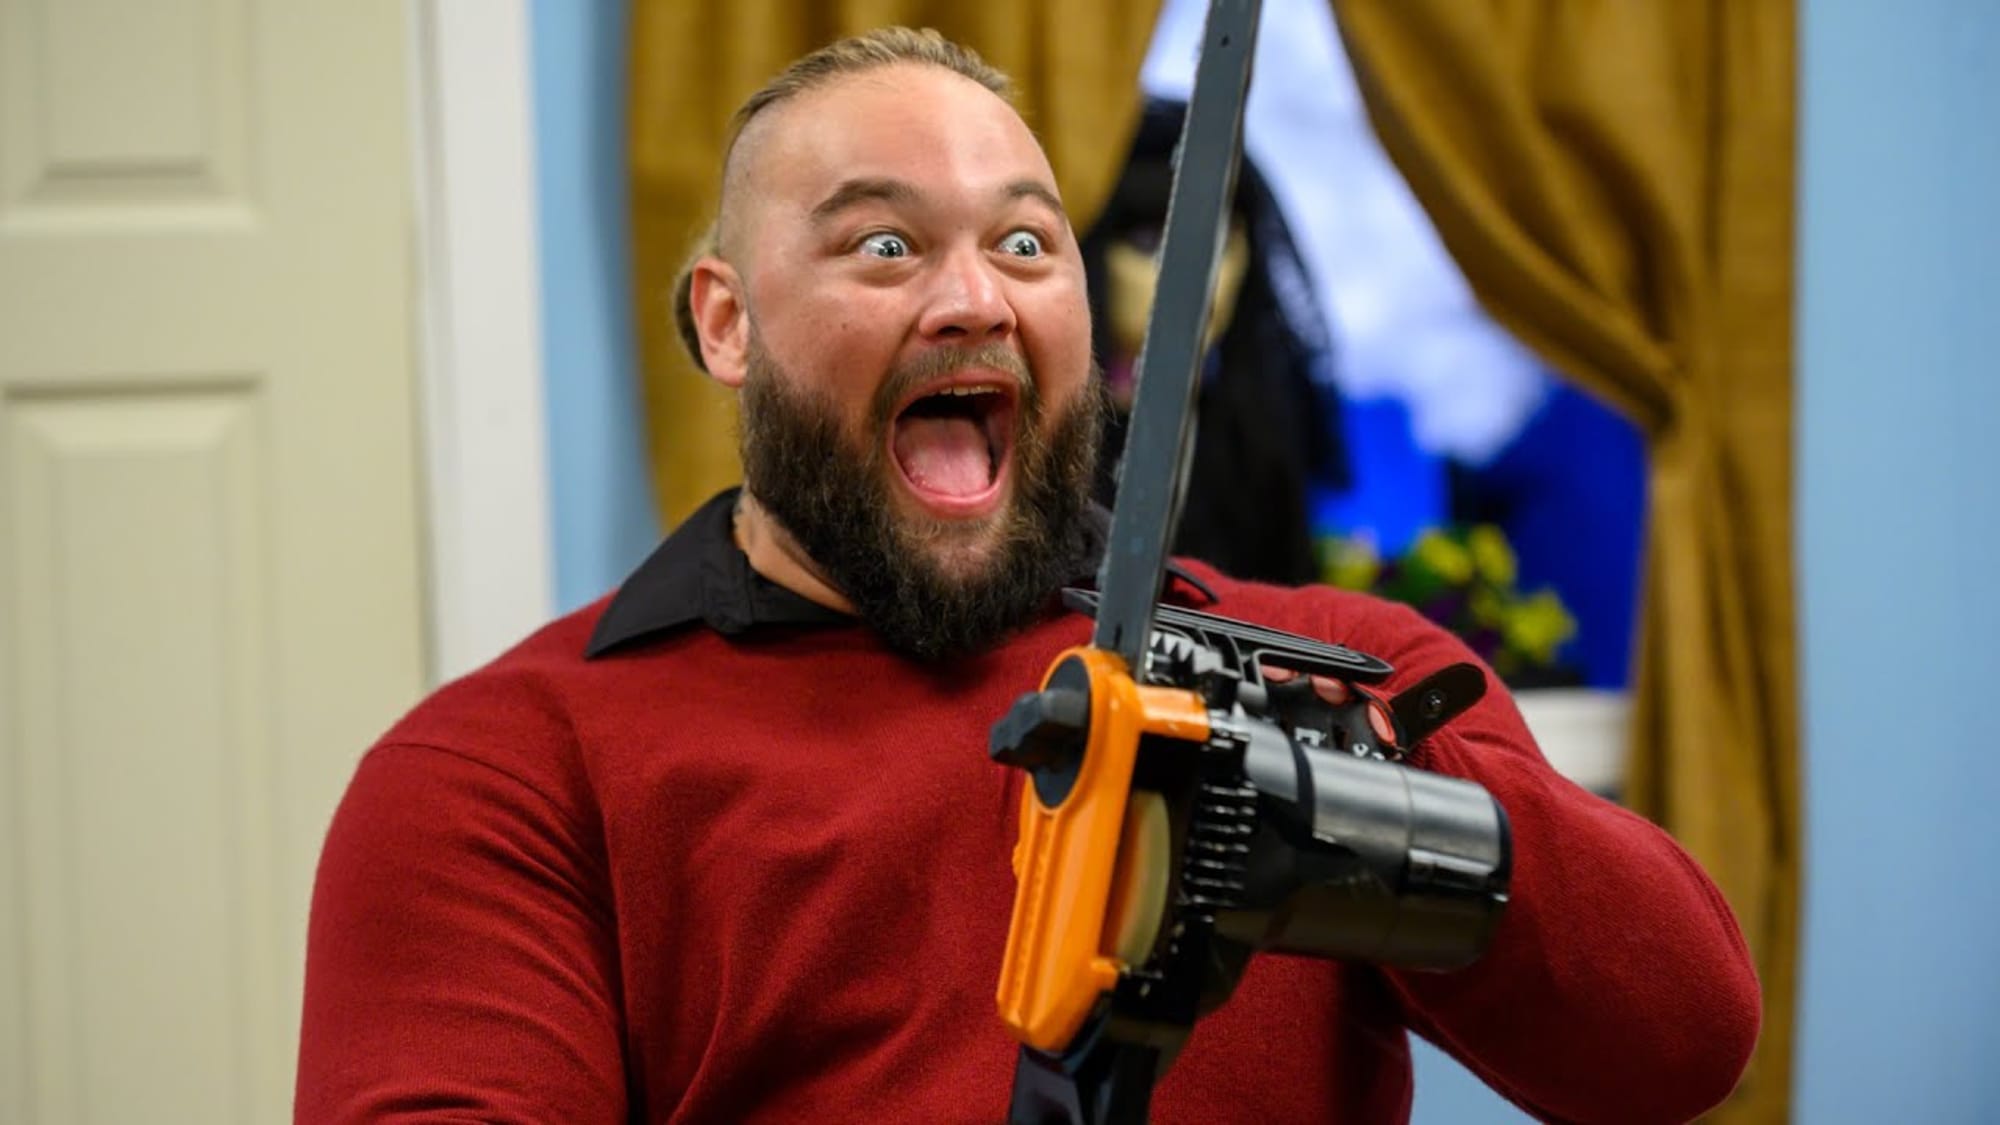 Possible Spoiler On Bray Wyatt's New Firefly Fun House Character